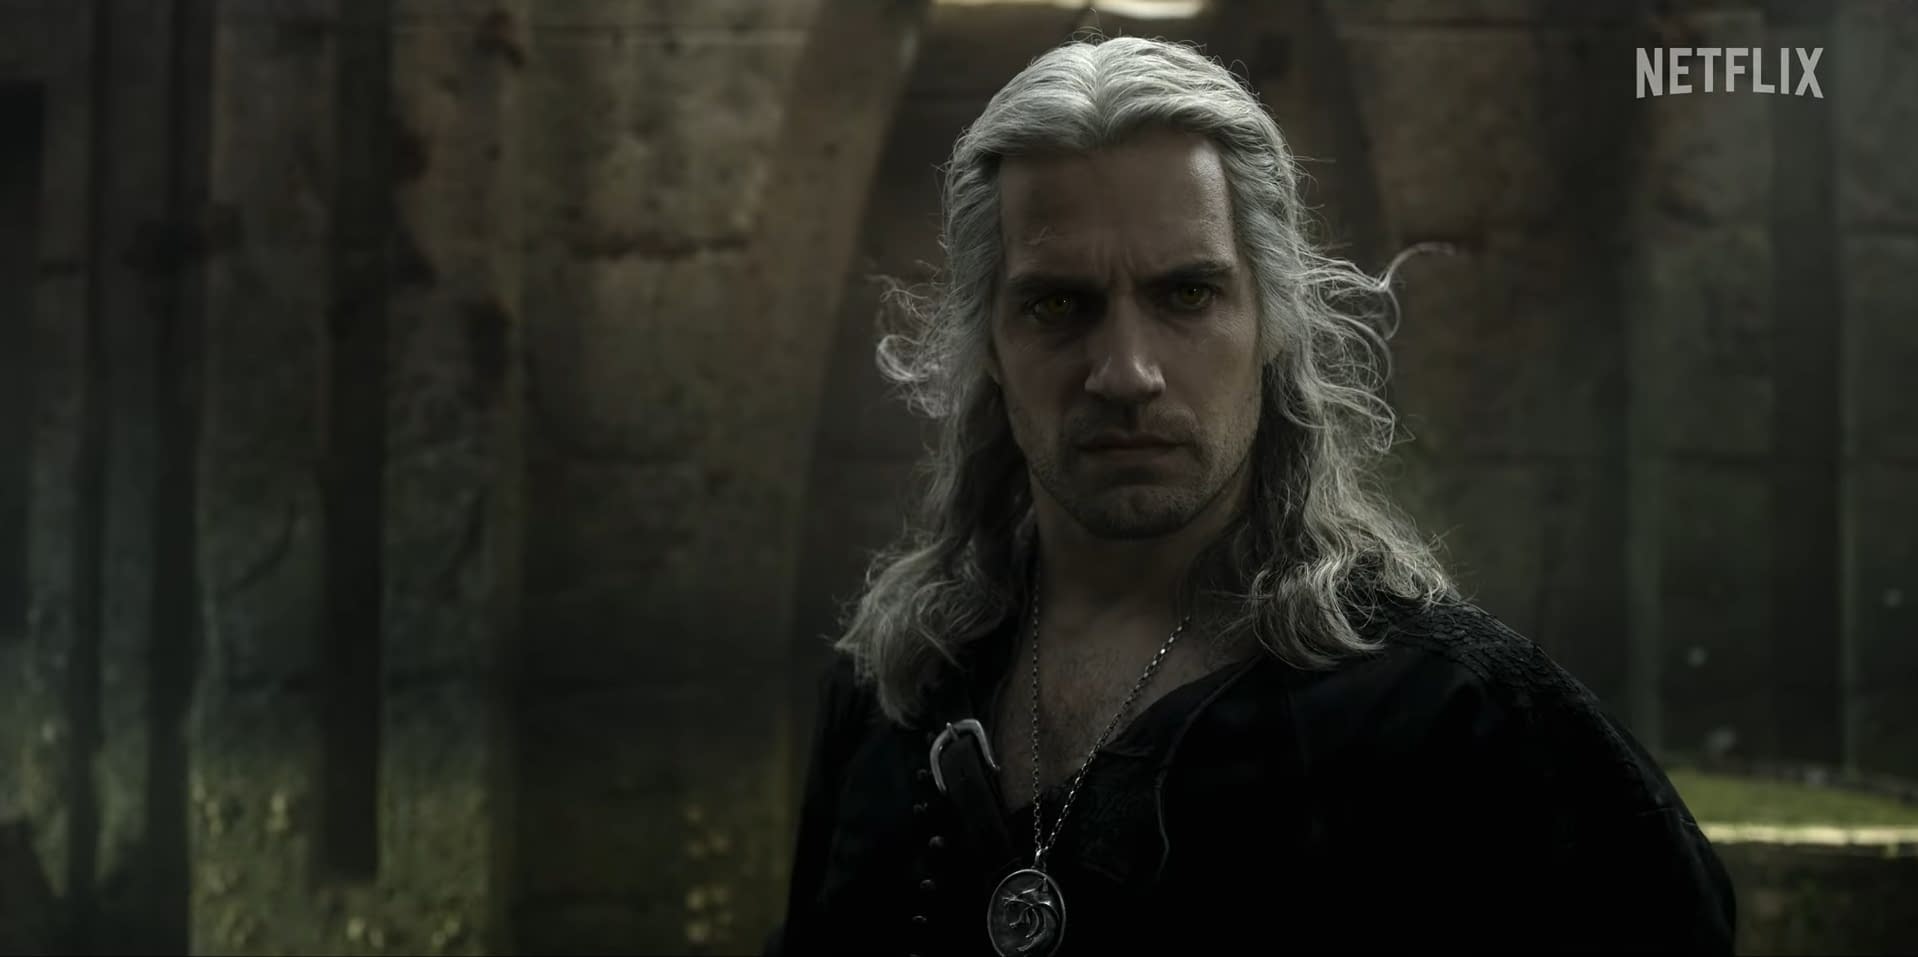 The Witcher review: Netflix series starring Henry Cavill is terrible